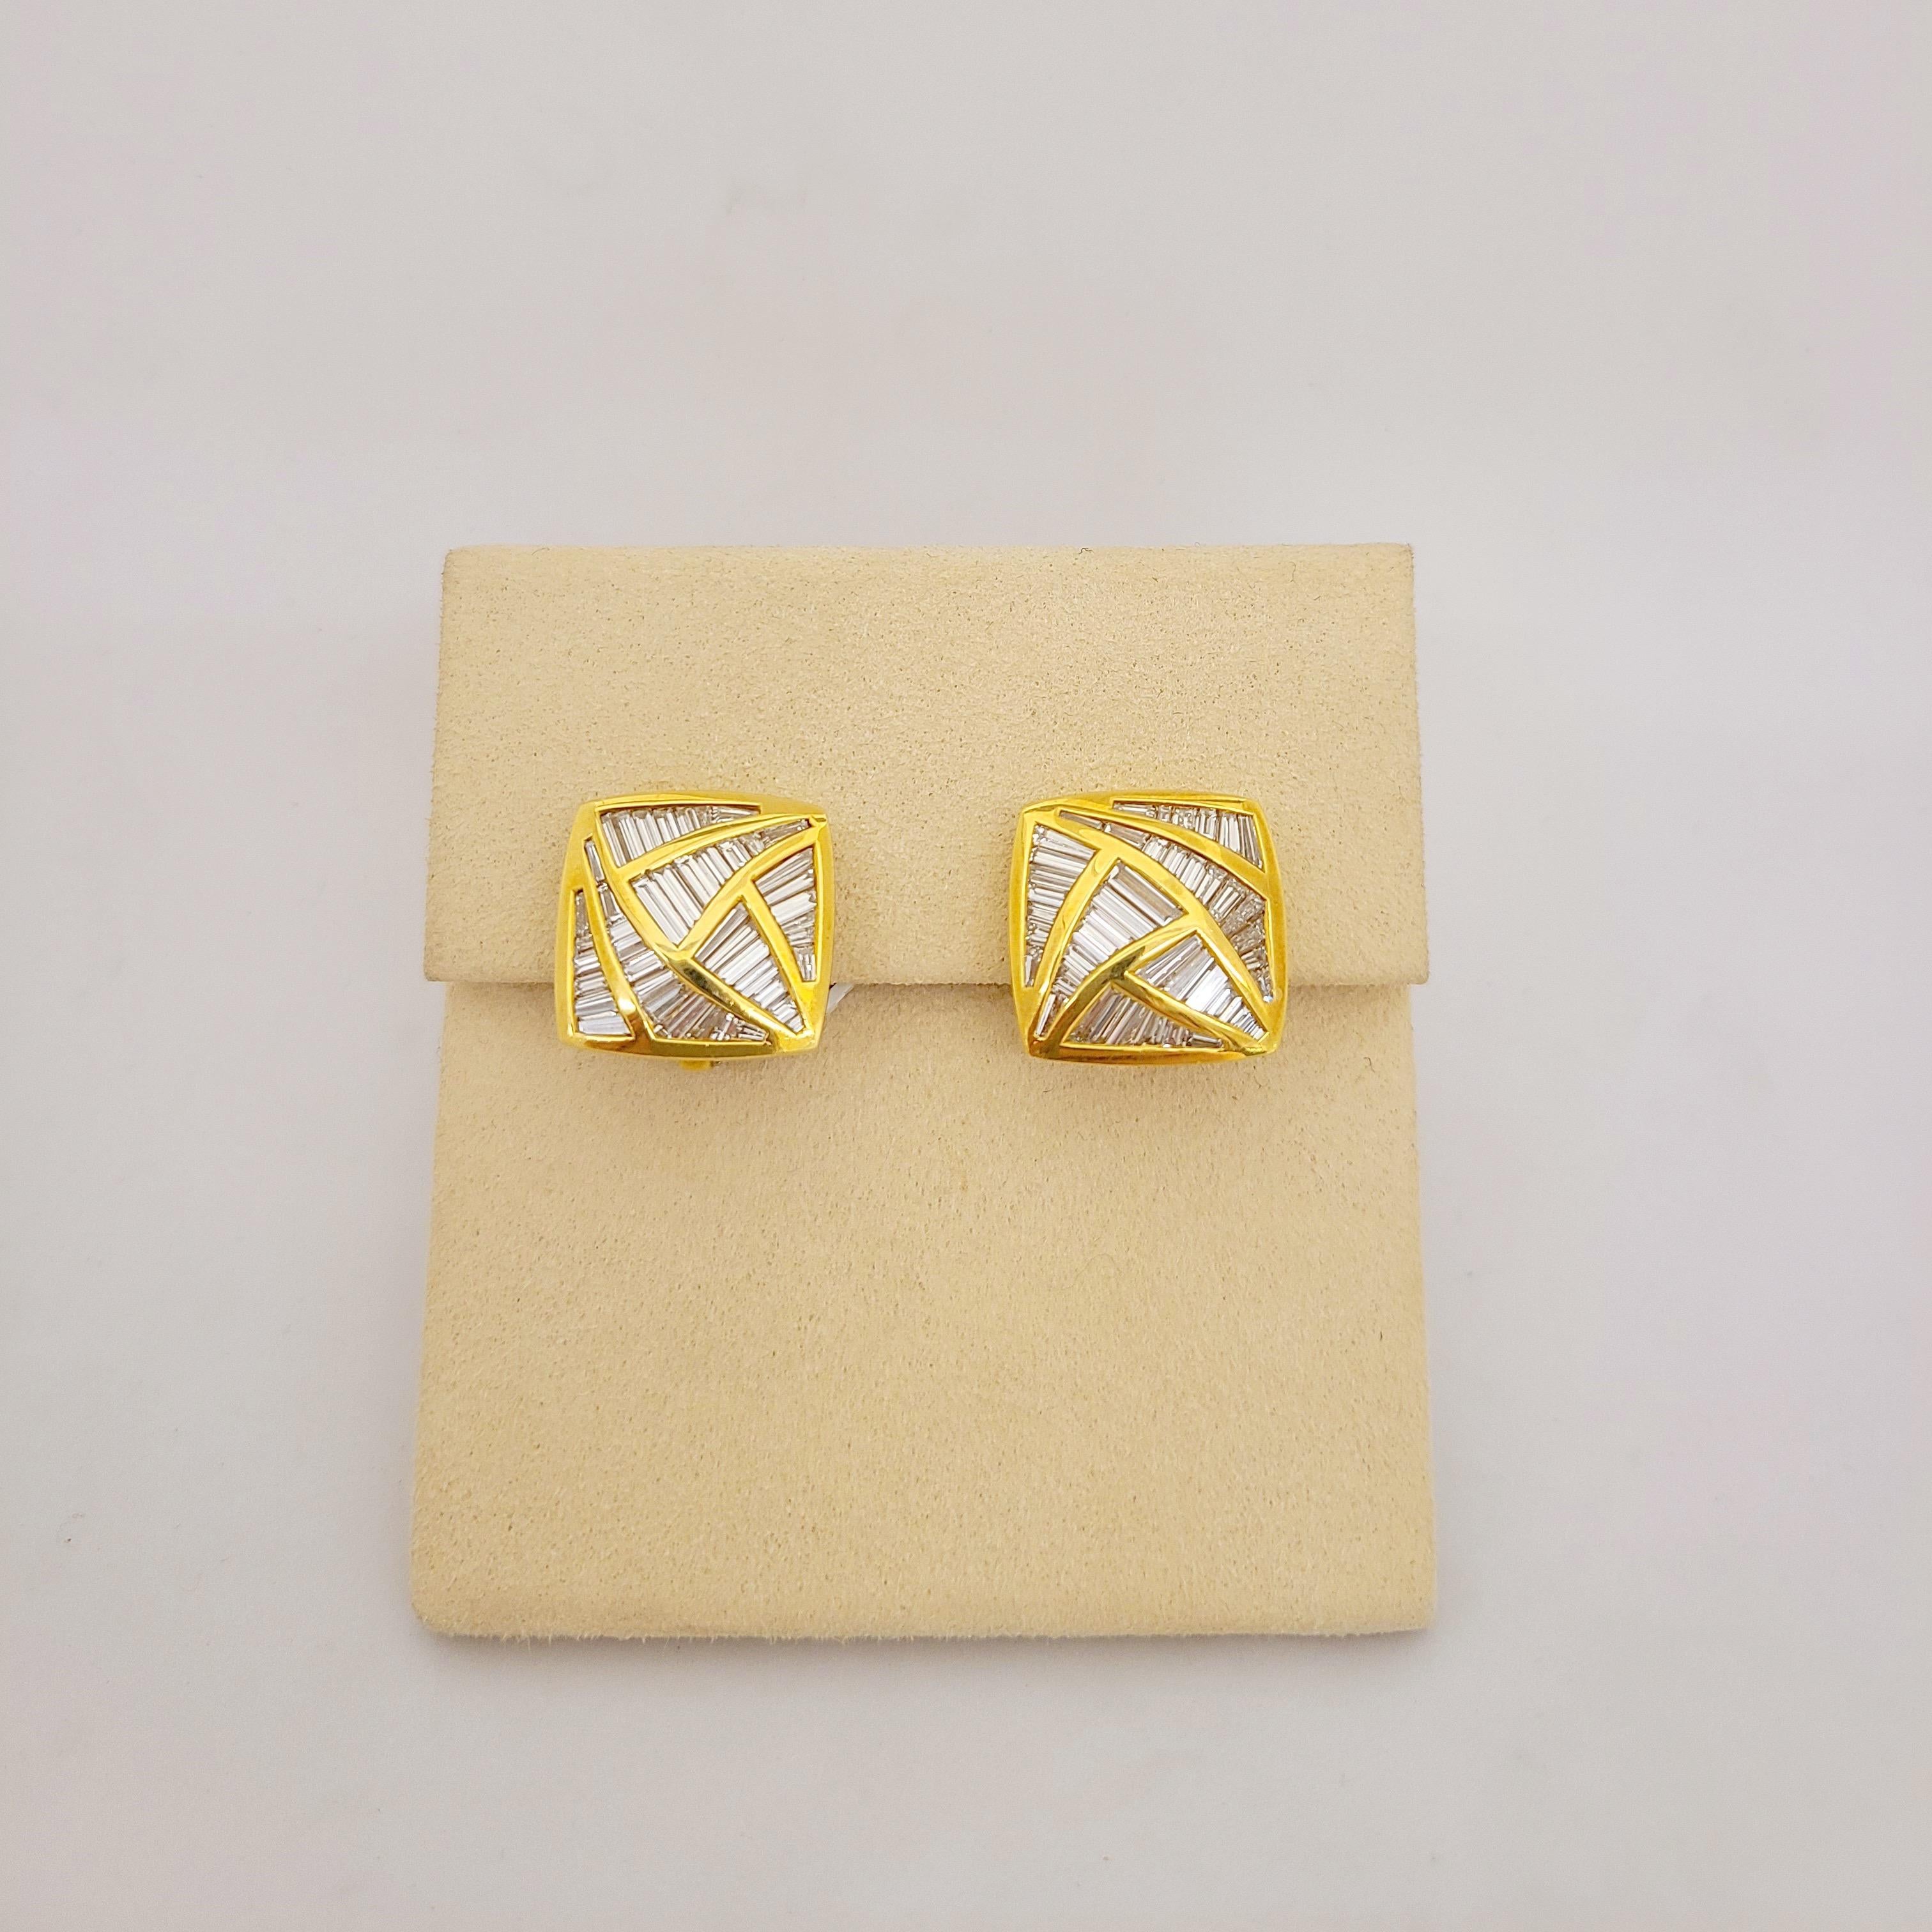 Designed by Nova Jewelry, these 18 Karat Yellow Gold Geometric designed Earrings are set with 5.29Ct. of Invisibly set baguette cut diamonds. The combination of the linear baguette cut diamond, triangular gold sections and square shaped earring make